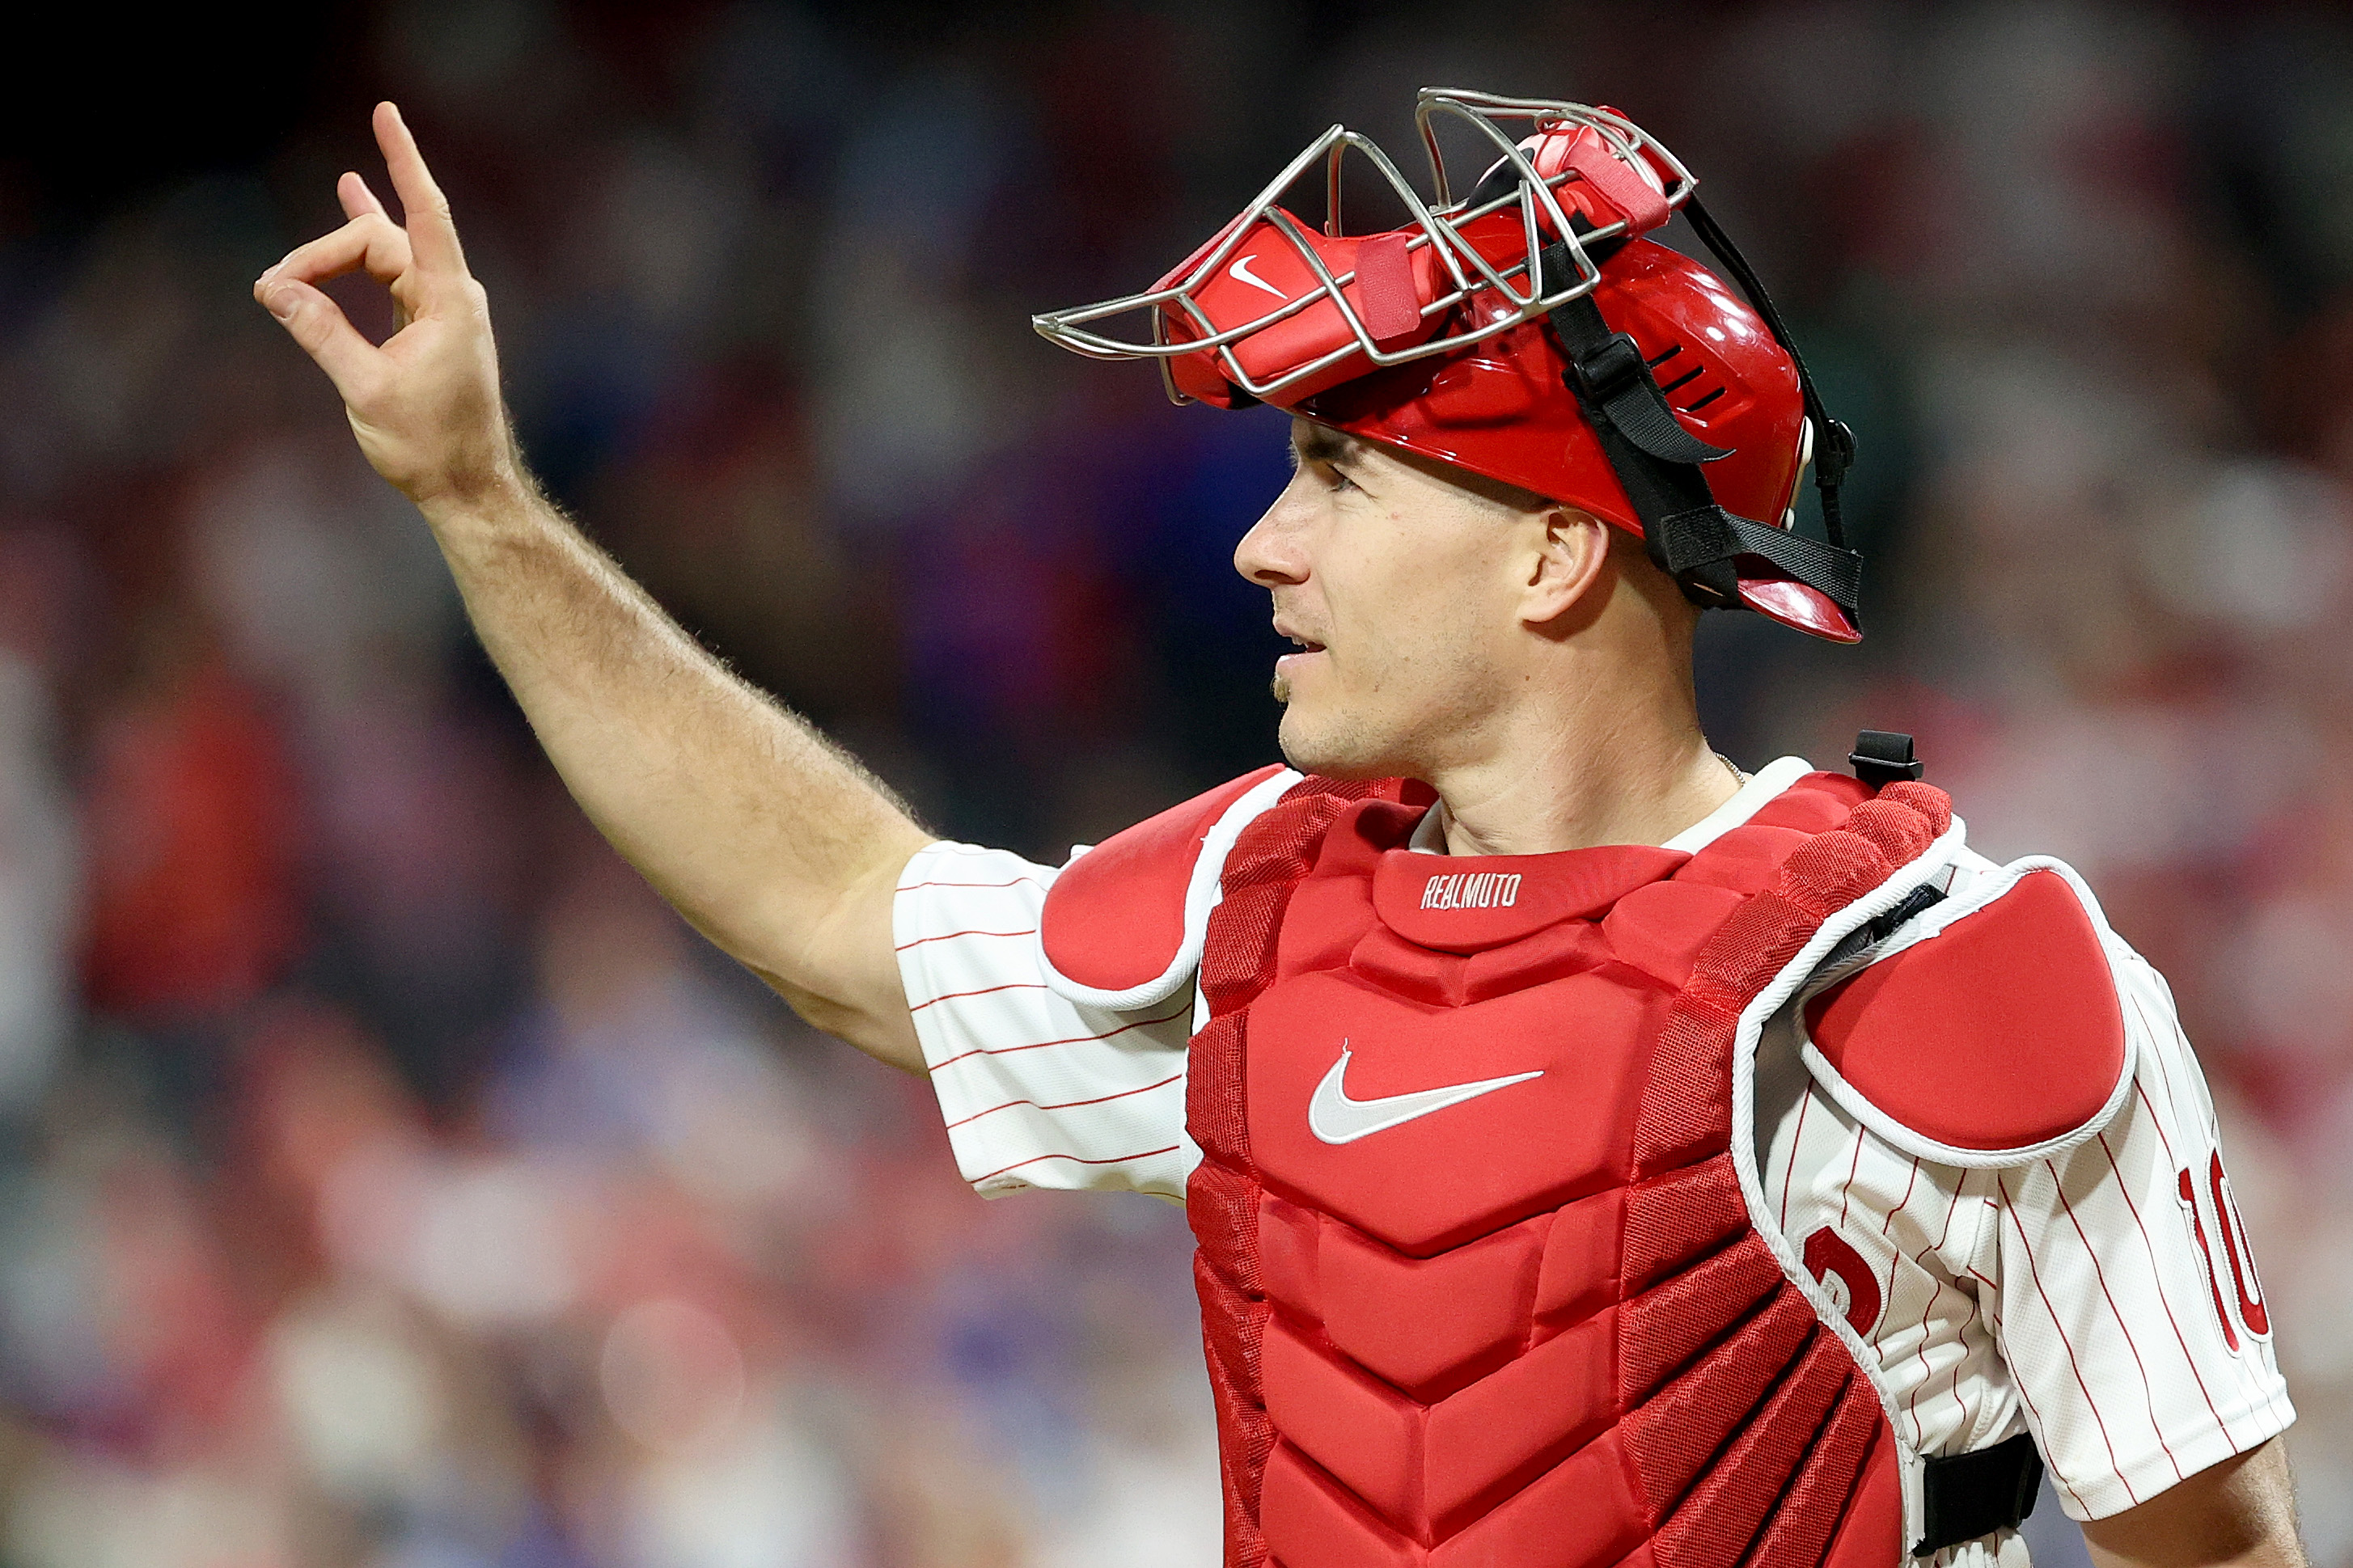 Spike This! Hoskins, Harper homer, Phils rout Braves in NLDS